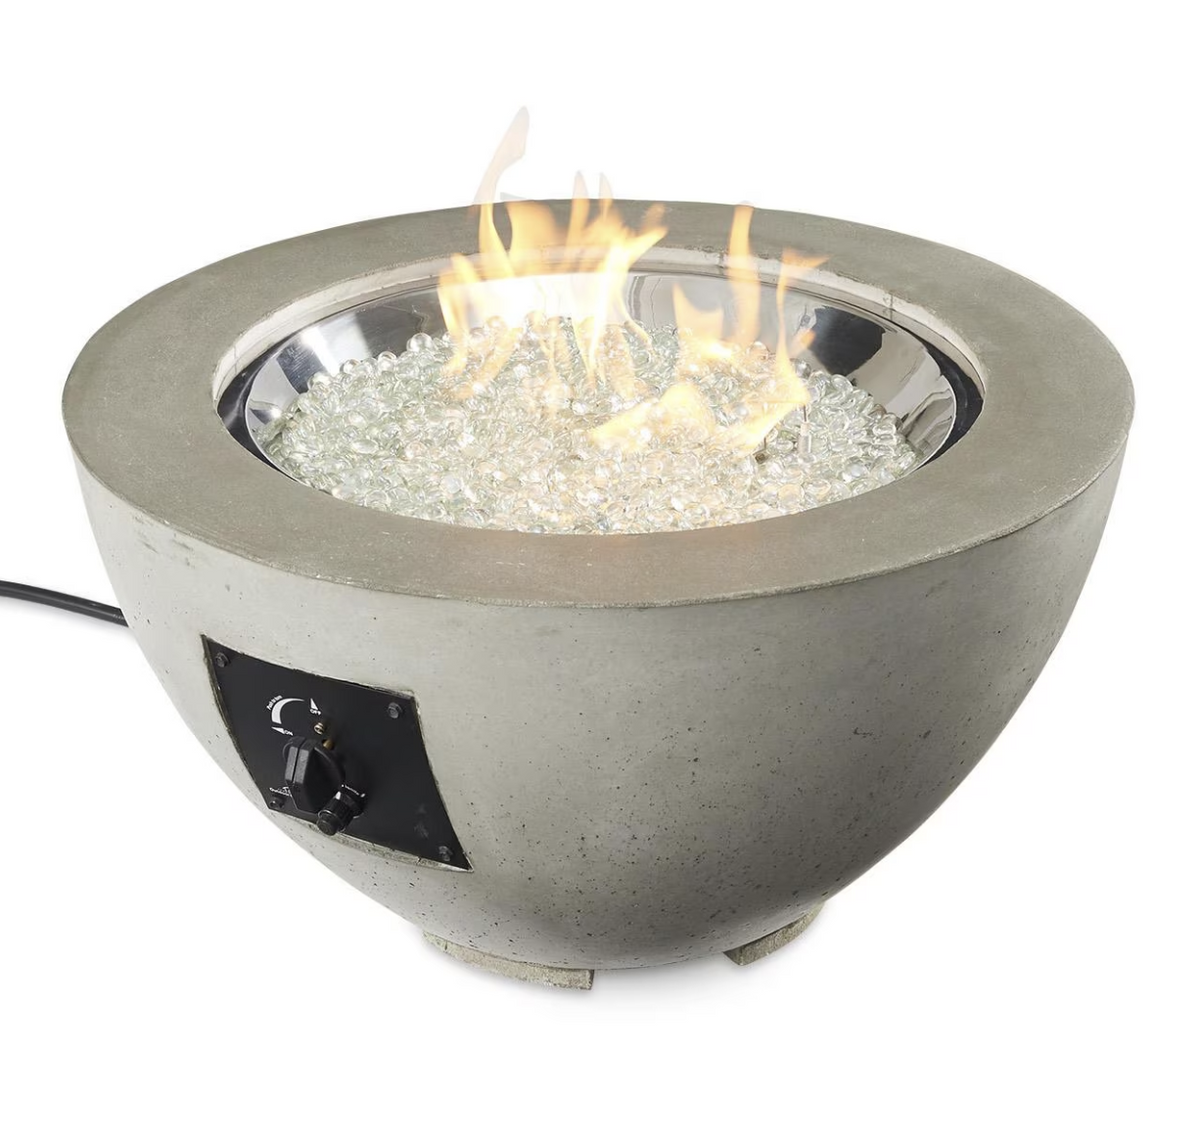 The Outdoor GreatRoom Company Cove 29-Inch Round Propane Gas Fire Pit Bowl with 20-Inch Crystal Fire Burner - Natural Grey - CV-20 - Room By The Tree 